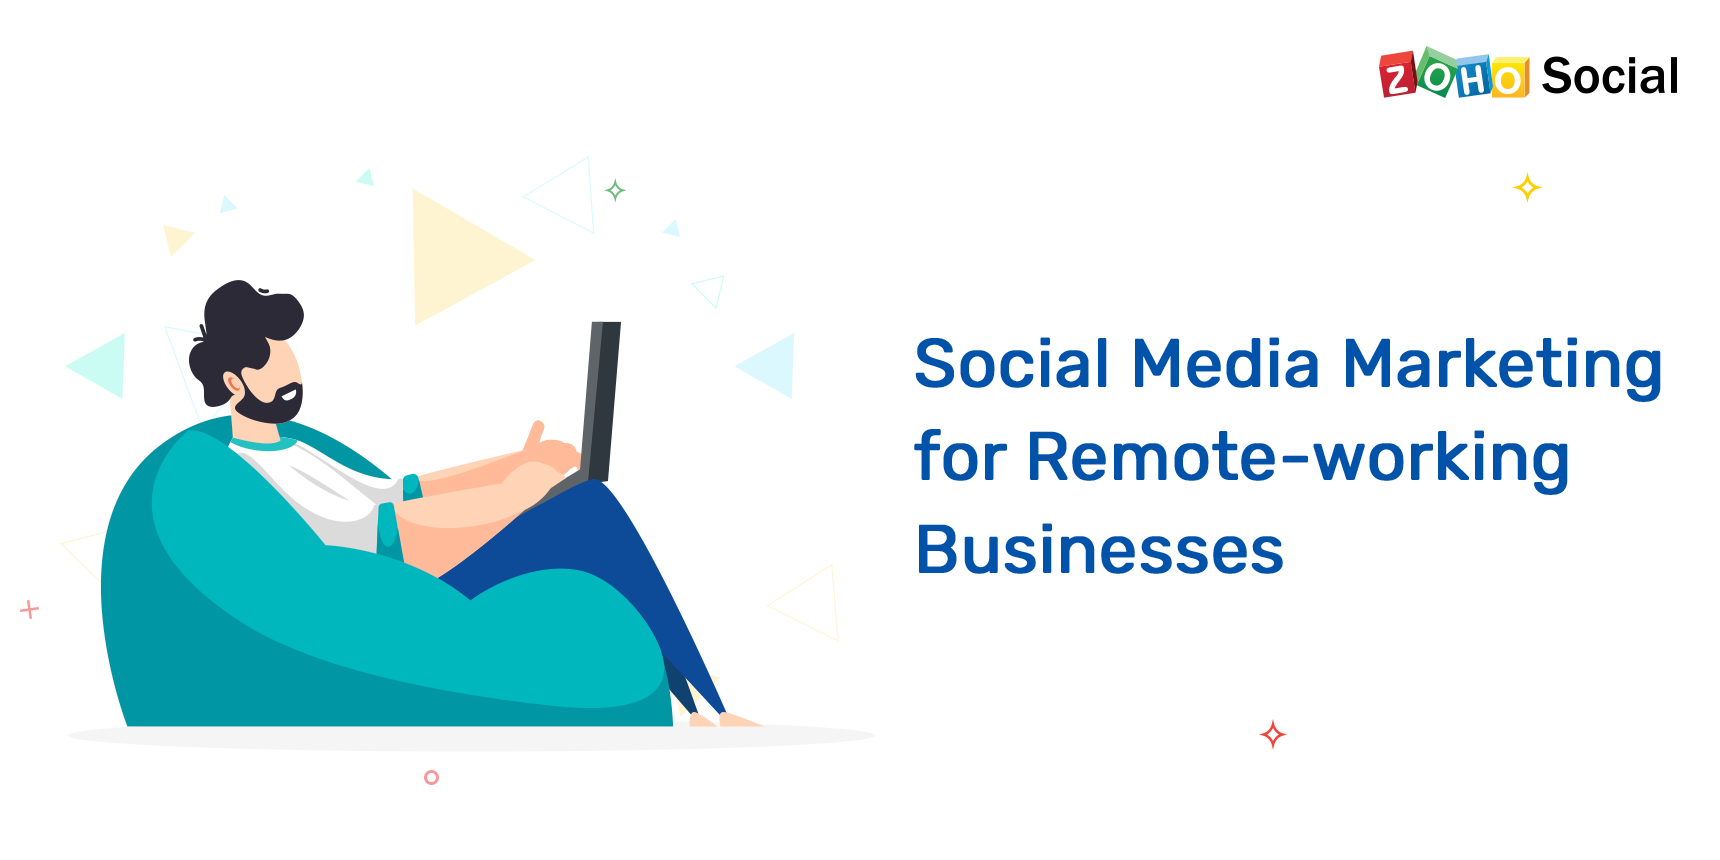 Social media marketing for the new wave of remote-working businesses